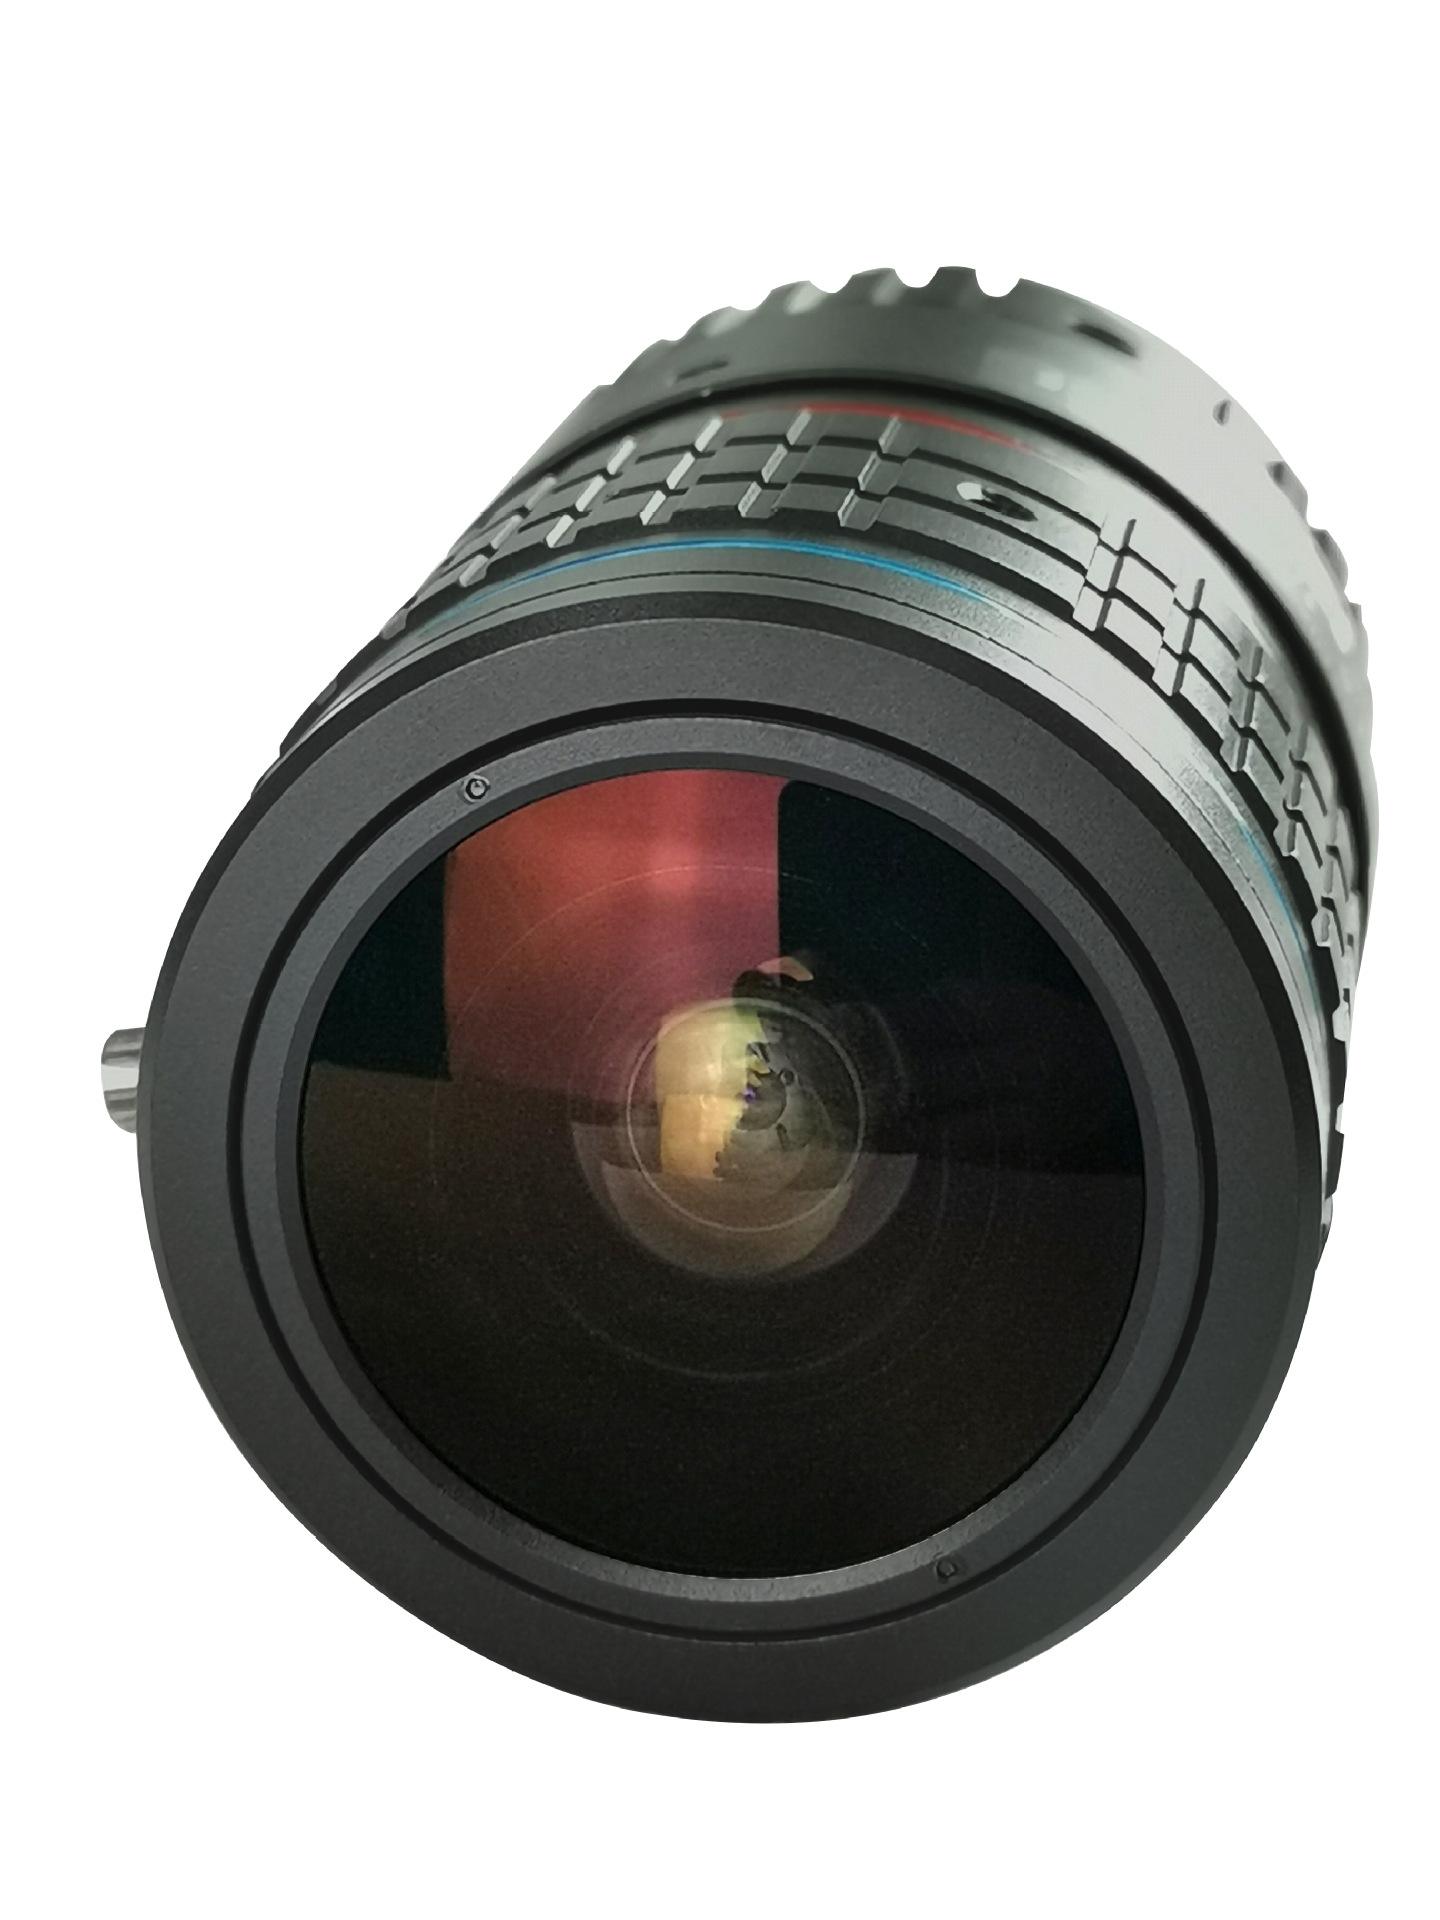 The difference between IR lens and ordinary lens